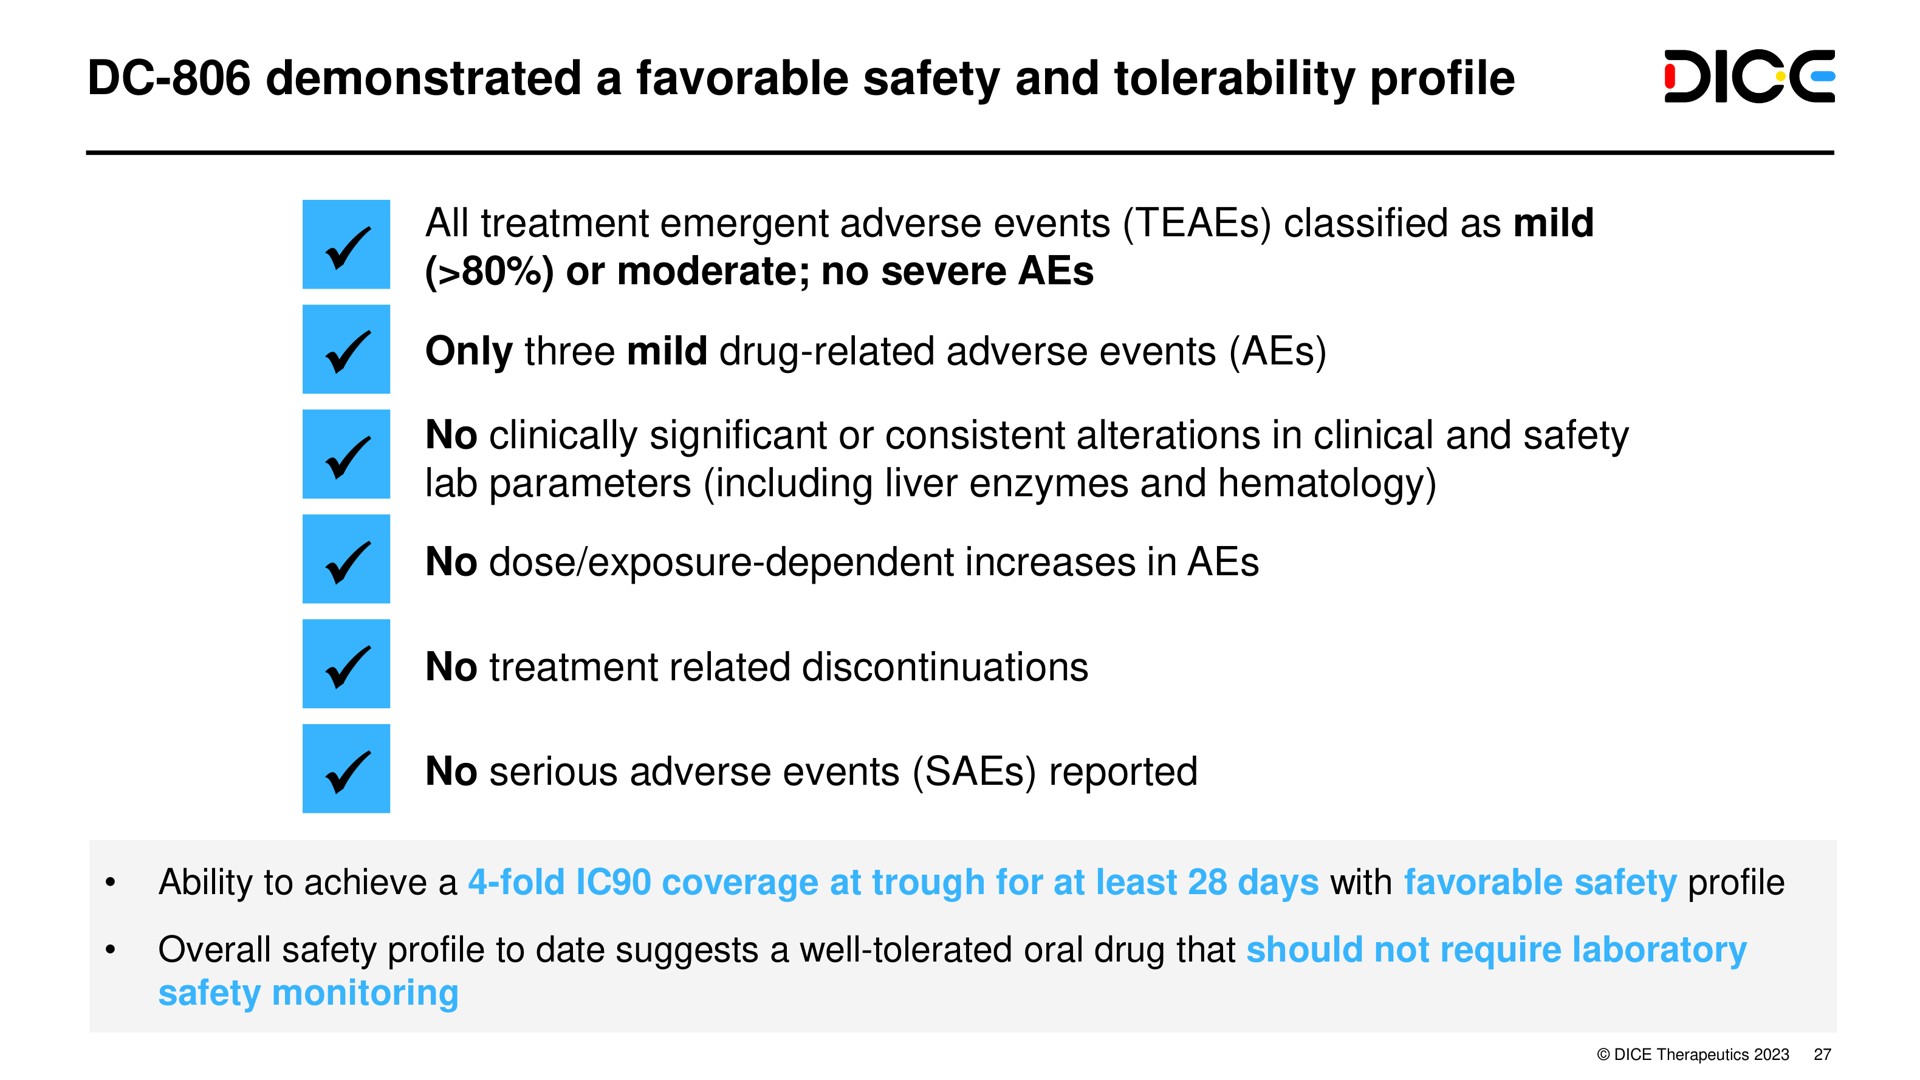 demonstrated a favorable safety and tolerability profile | DICE Therapeutics